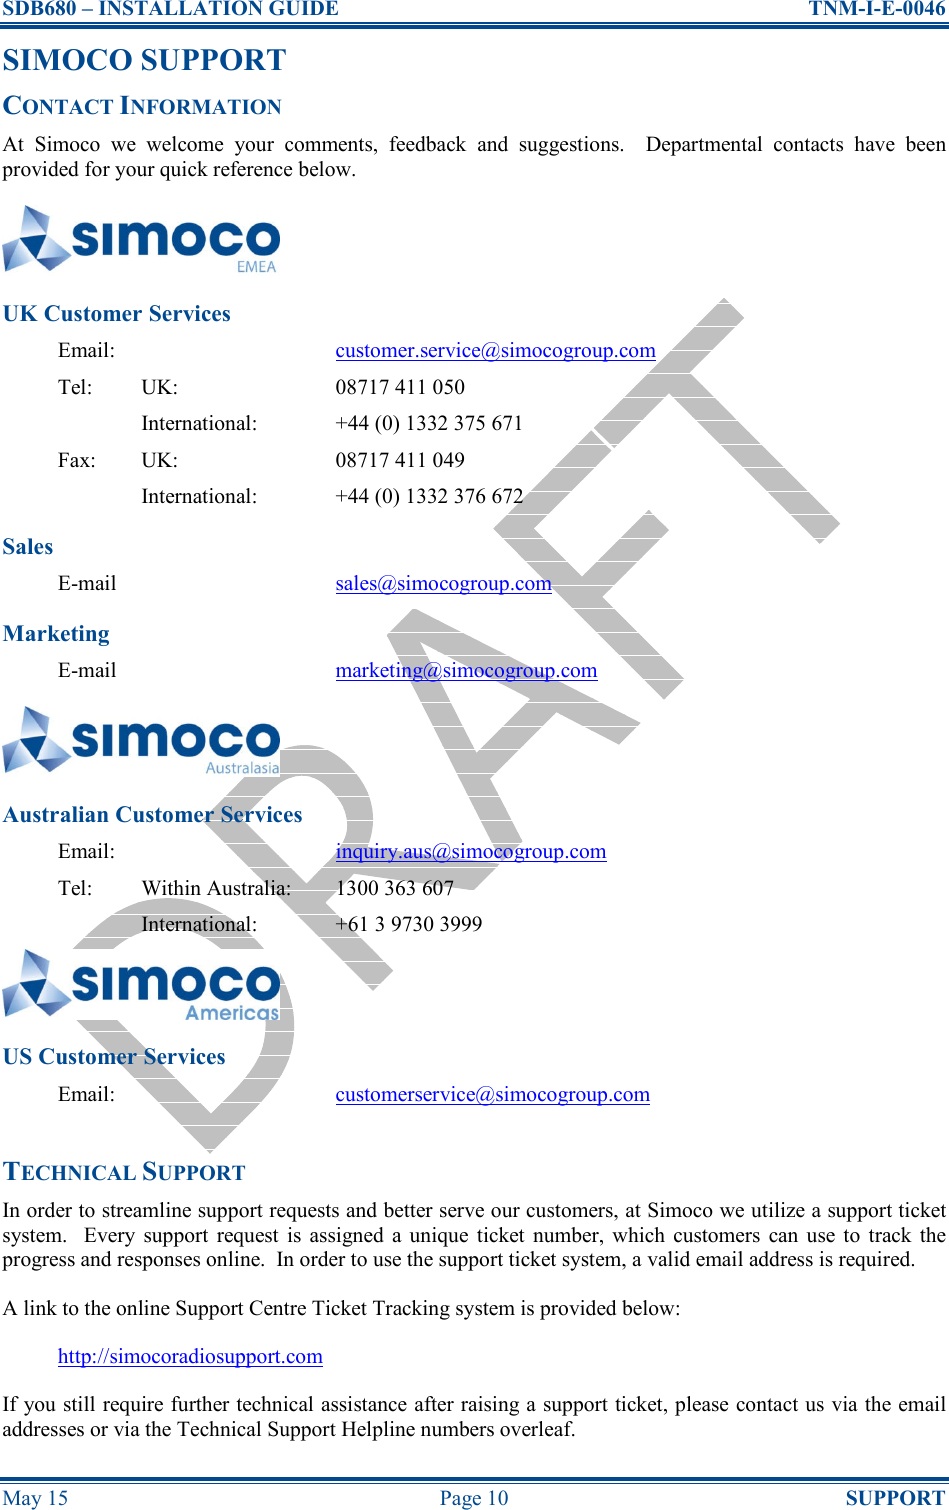 SDB680 – INSTALLATION GUIDE  TNM-I-E-0046 May 15  Page 10  SUPPORT SIMOCO SUPPORT CONTACT INFORMATION At  Simoco  we  welcome  your  comments,  feedback  and  suggestions.    Departmental  contacts  have  been provided for your quick reference below.  UK Customer Services Email:  customer.service@simocogroup.com Tel:  UK:  08717 411 050   International:  +44 (0) 1332 375 671 Fax:  UK:  08717 411 049   International:  +44 (0) 1332 376 672 Sales E-mail  sales@simocogroup.com Marketing E-mail  marketing@simocogroup.com  Australian Customer Services Email:  inquiry.aus@simocogroup.com Tel:  Within Australia:  1300 363 607   International:  +61 3 9730 3999  US Customer Services Email:  customerservice@simocogroup.com  TECHNICAL SUPPORT In order to streamline support requests and better serve our customers, at Simoco we utilize a support ticket system.    Every  support  request  is  assigned  a  unique  ticket  number, which  customers  can  use to  track the progress and responses online.  In order to use the support ticket system, a valid email address is required. A link to the online Support Centre Ticket Tracking system is provided below: http://simocoradiosupport.com If you still require further technical assistance after raising a support ticket, please contact us via the email addresses or via the Technical Support Helpline numbers overleaf. 